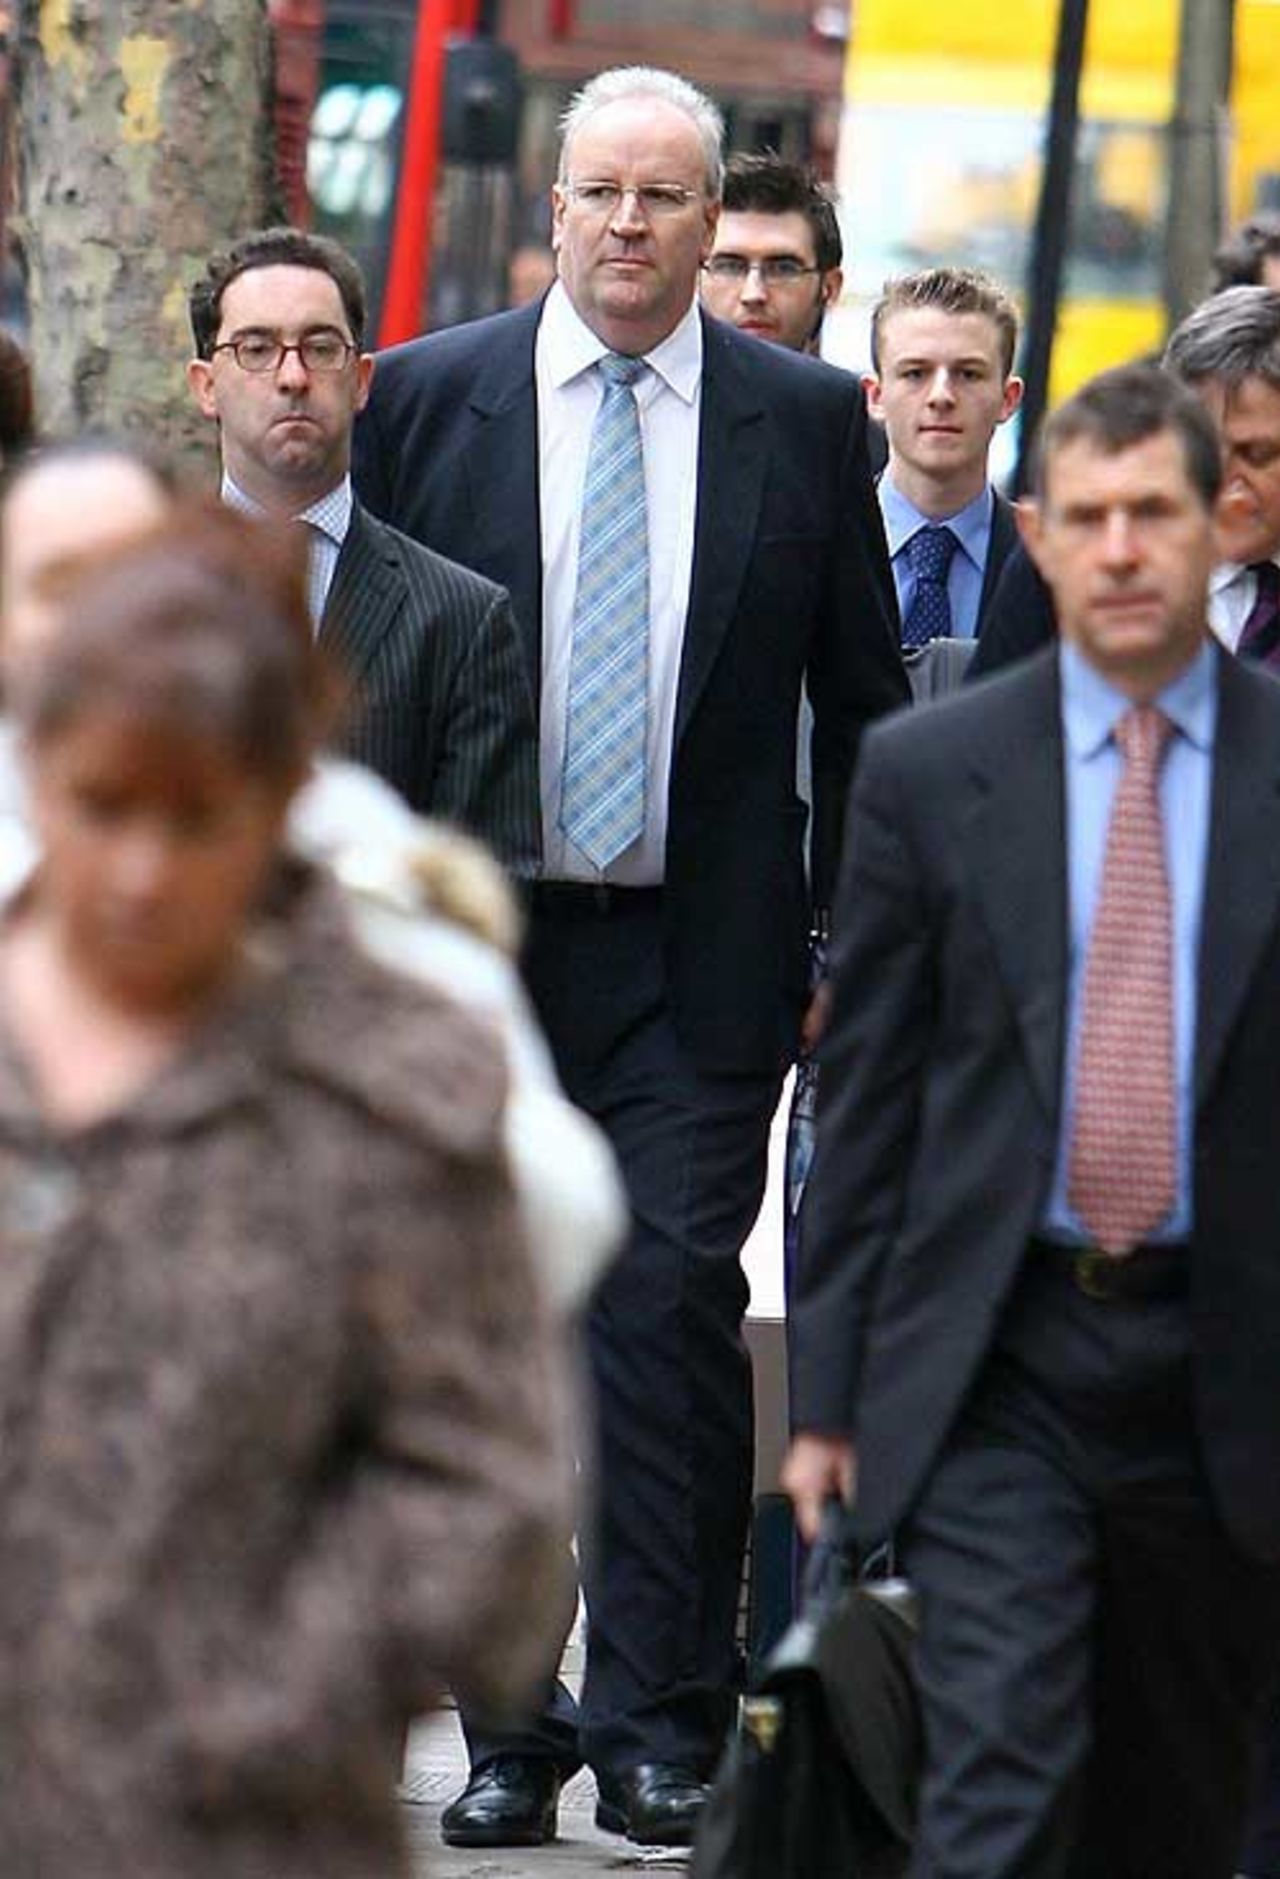 Darrell Hair walks to the High Court in London ahead of his employment tribunal, October 1, 2007